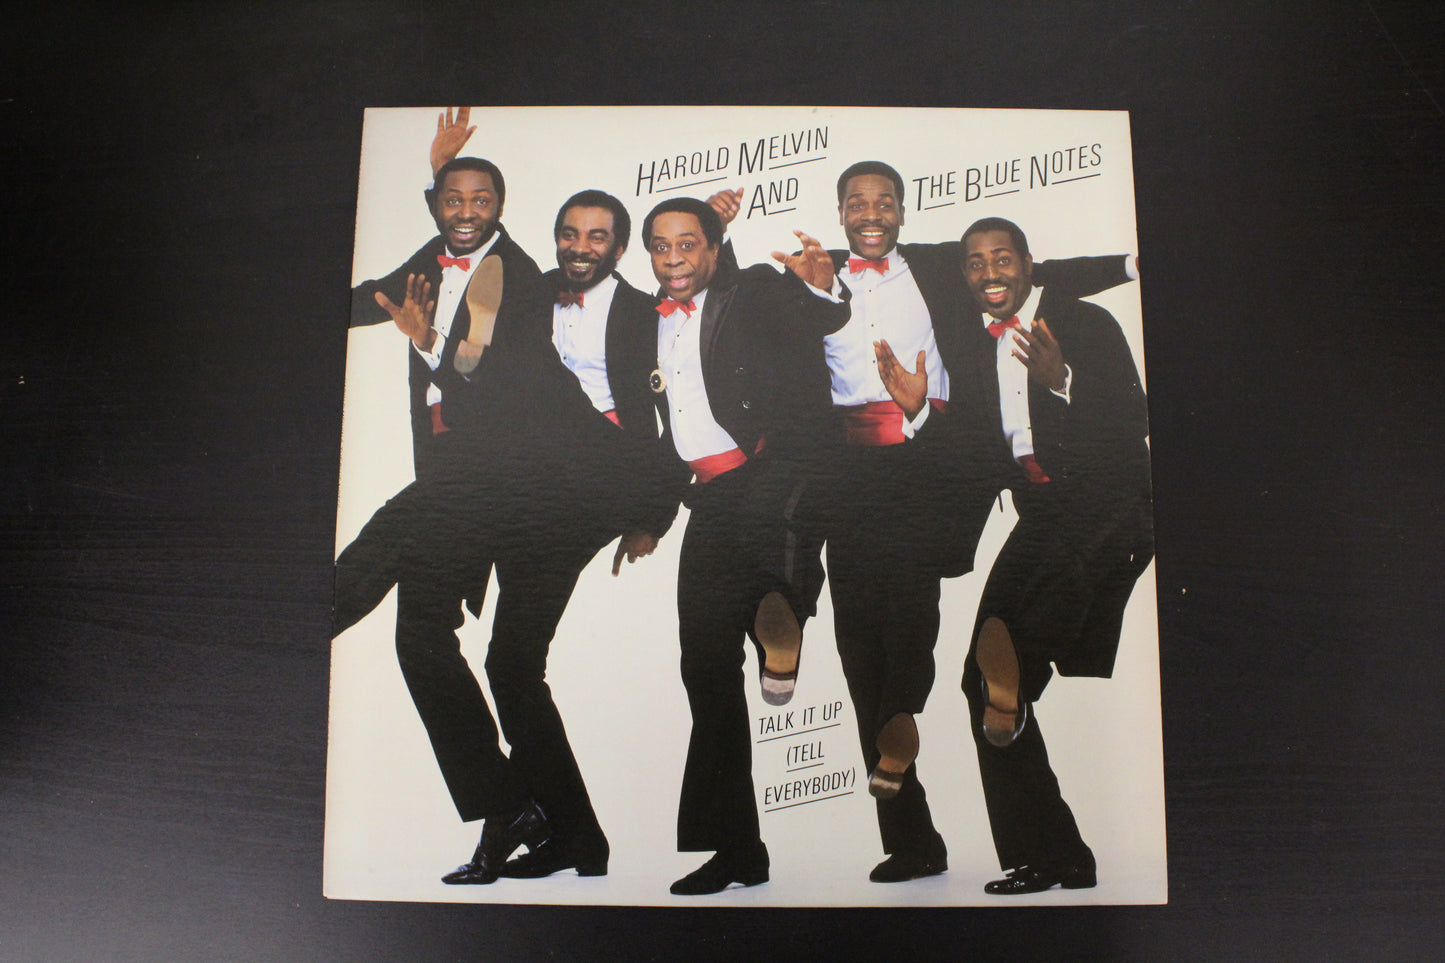 Harold Melvin and the Blue Notes: Talk It up (Tell Everybody)